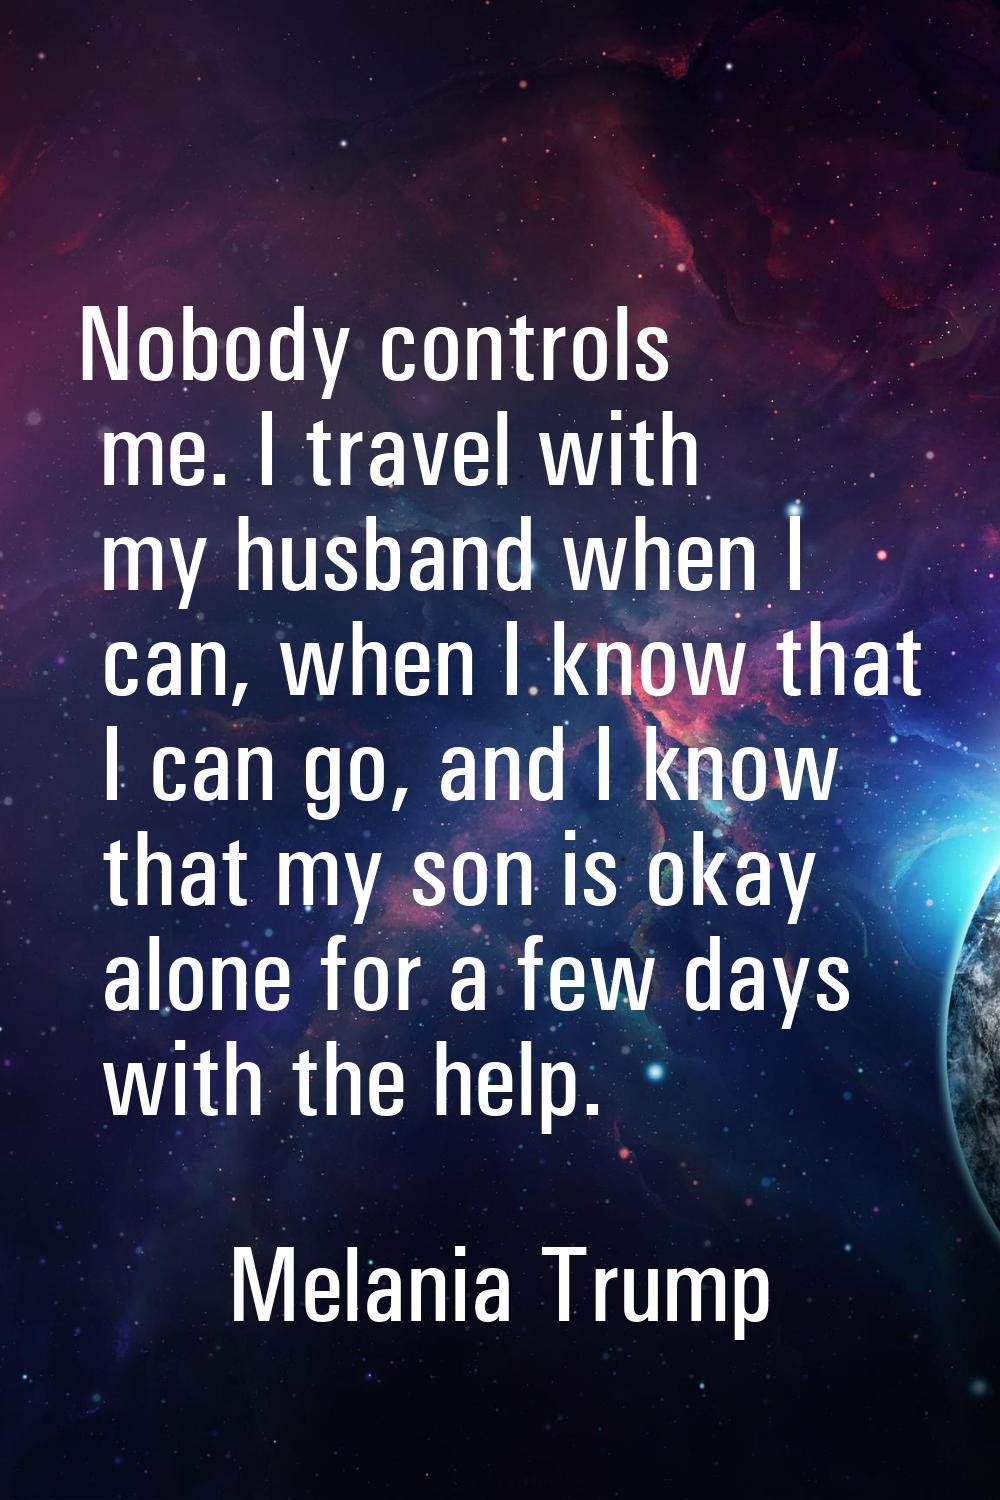 Nobody controls me. I travel with my husband when I can, when I know that I can go, and I know that